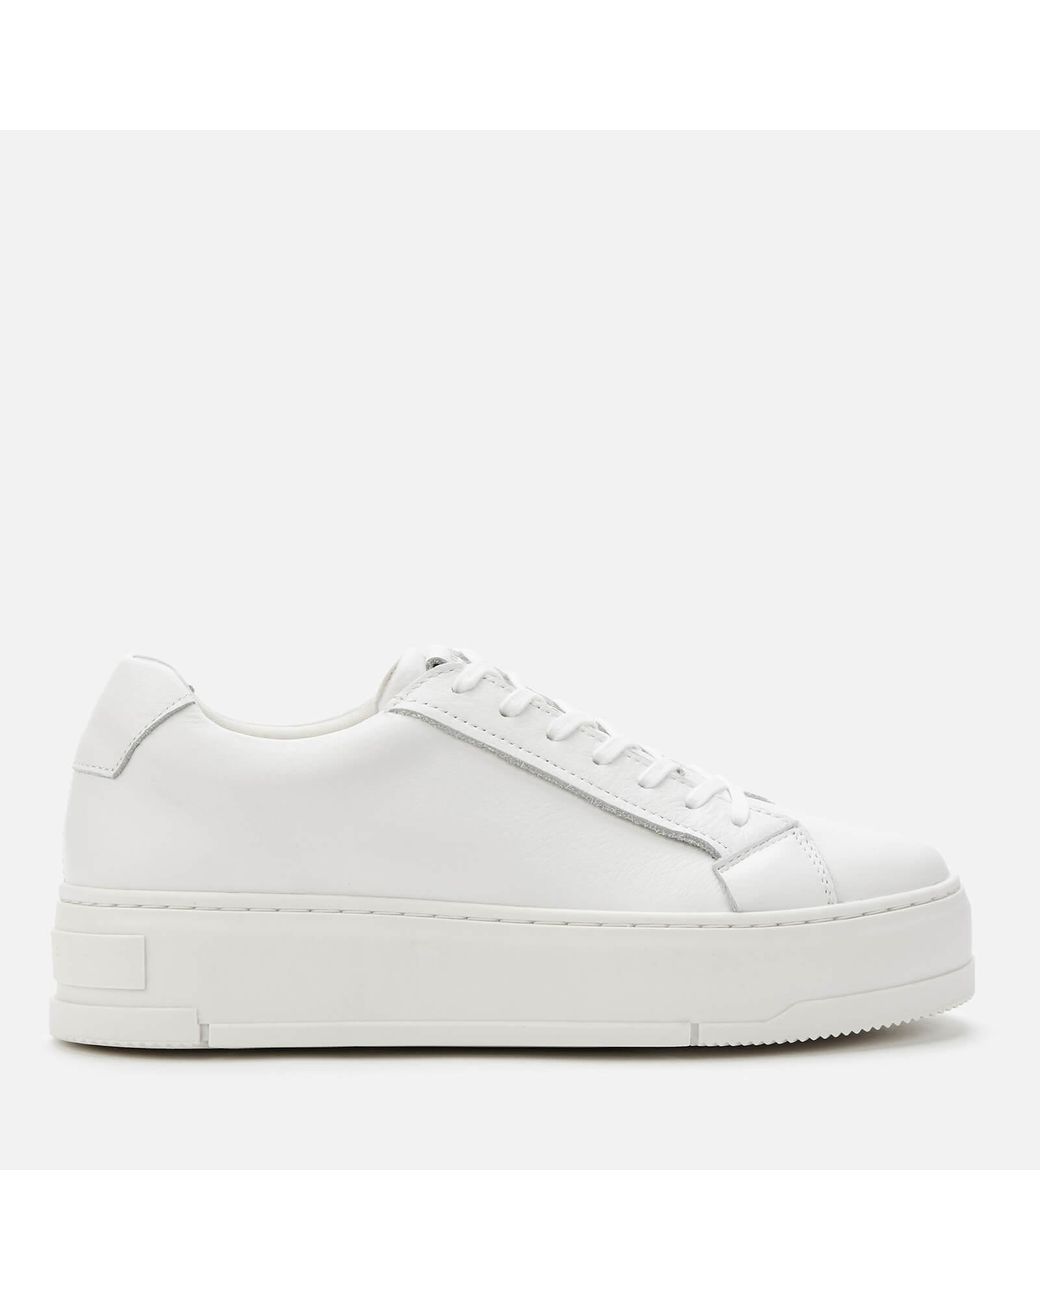 Vagabond Judy Womens Leather Platform Trainers In White Size UK 3-8 